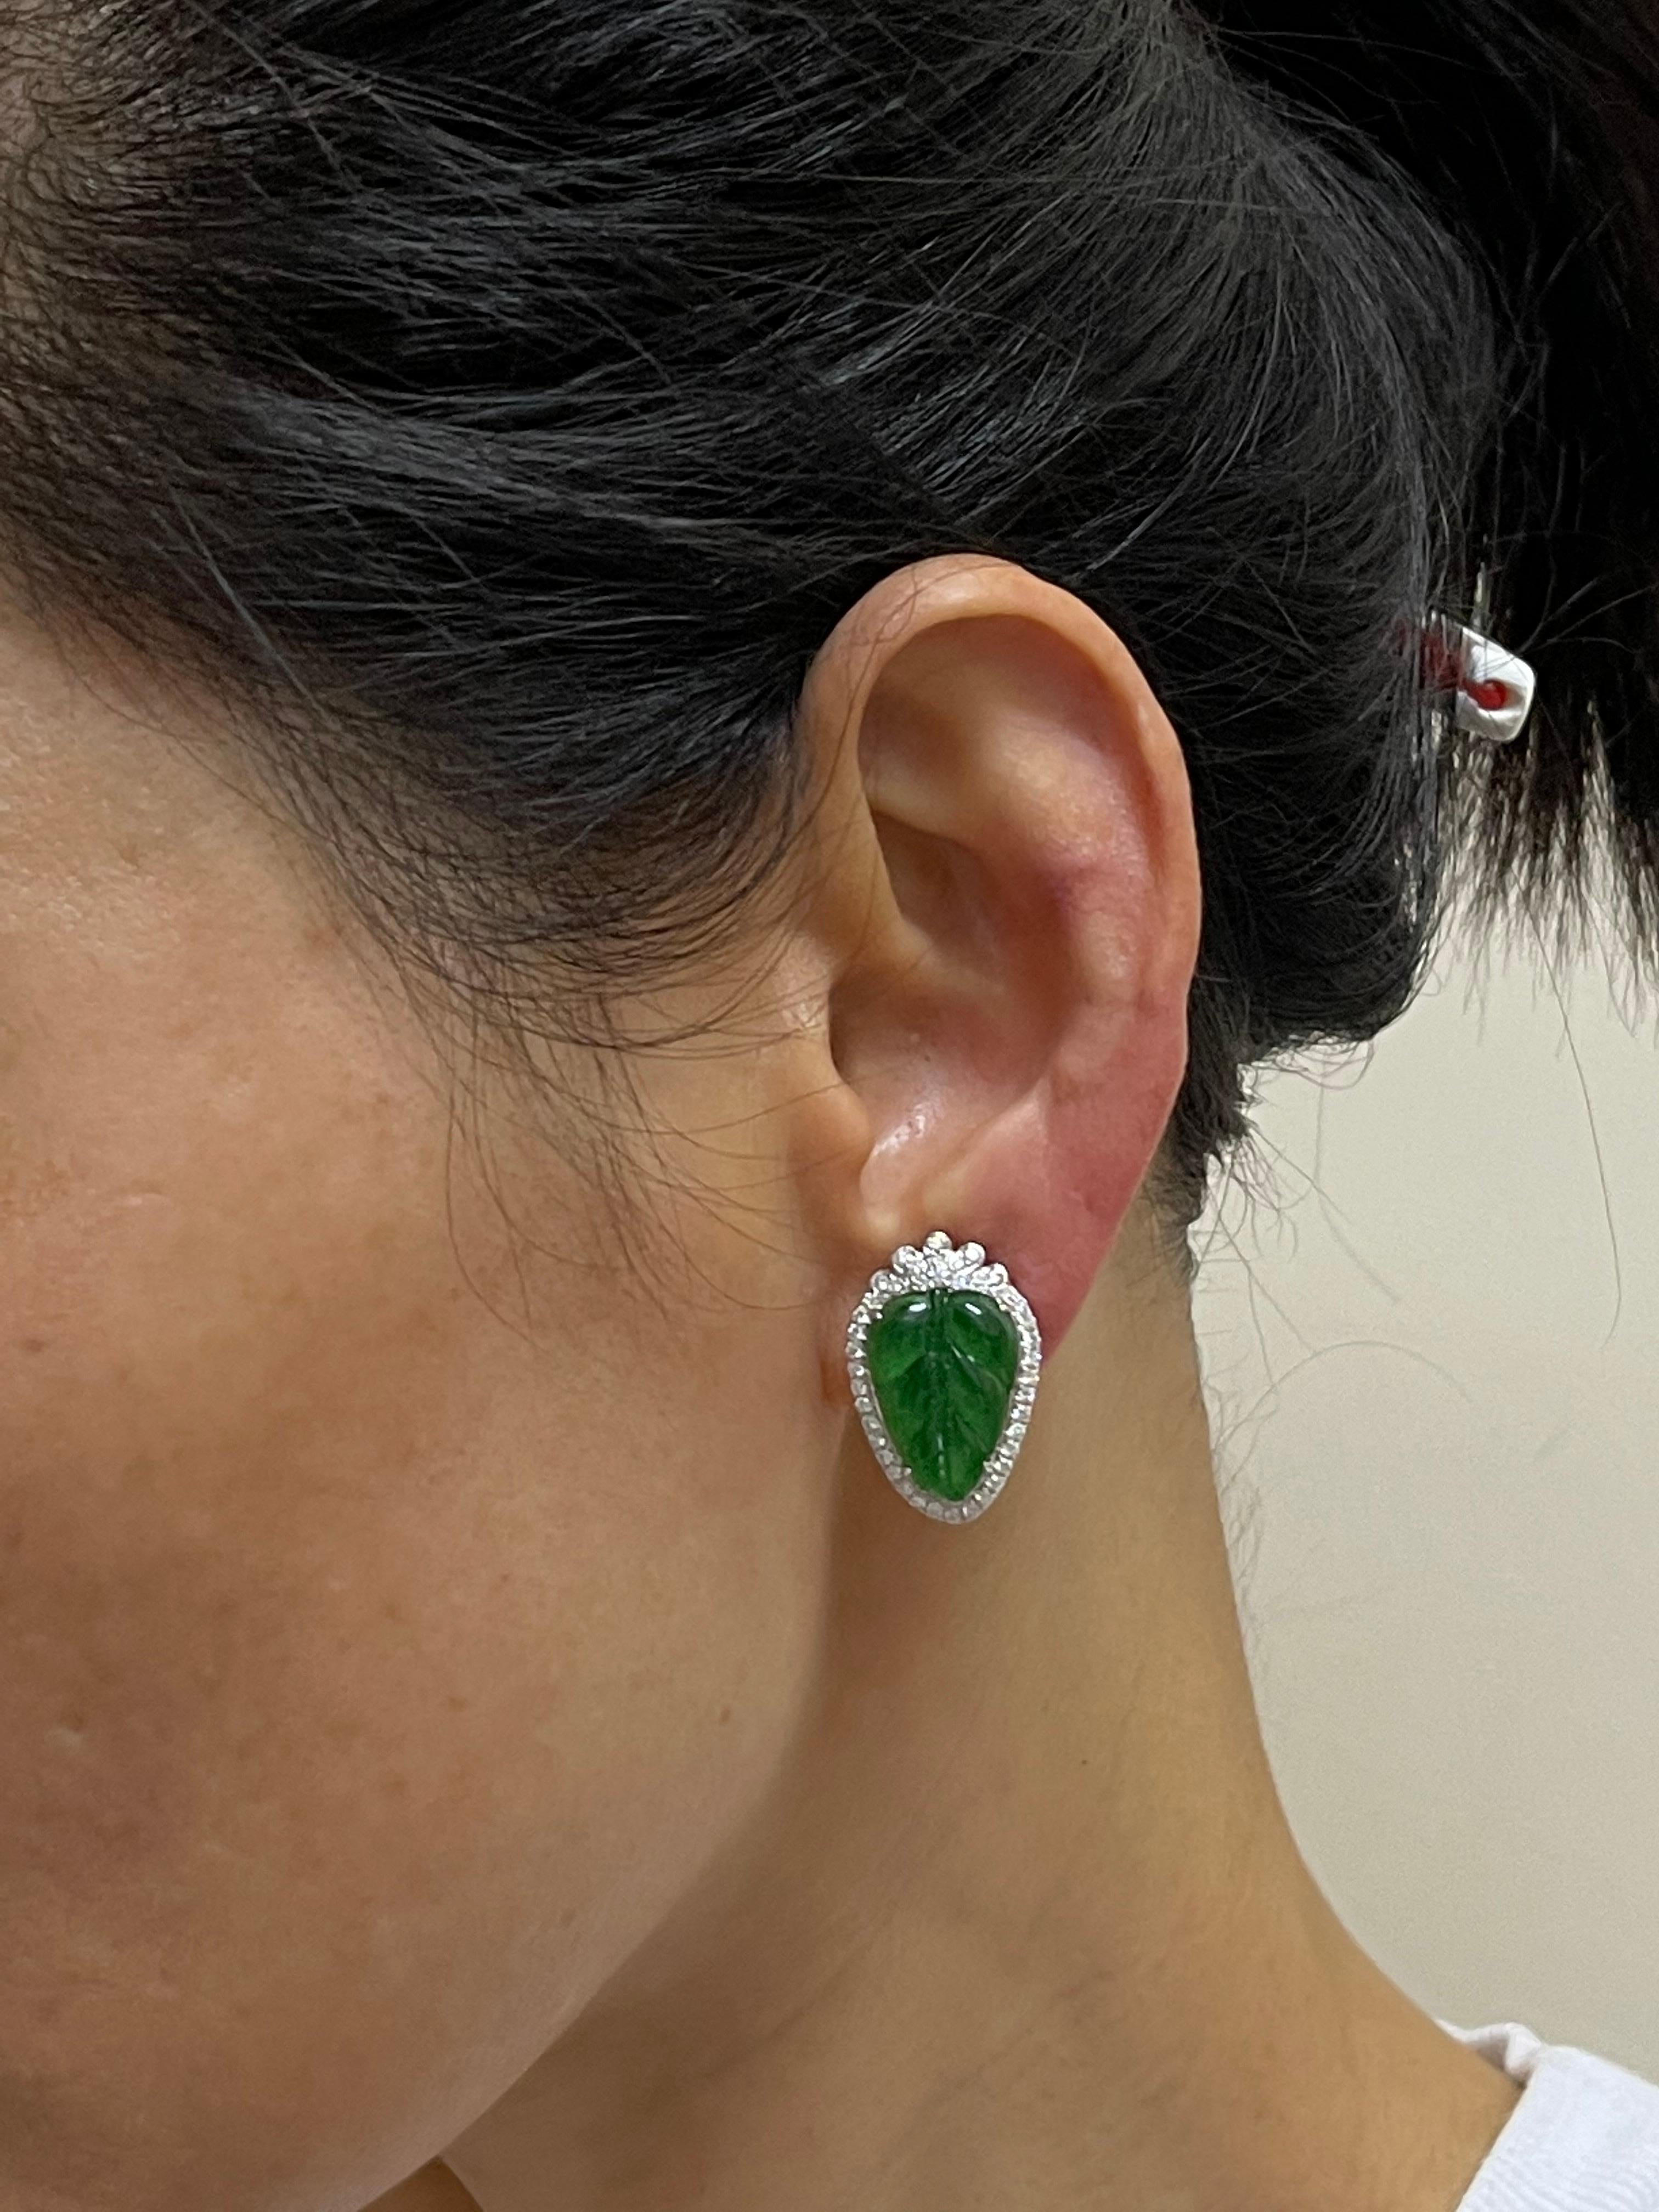 This is a very special pair of earrings. Made with the best imperial jade. They GLOW! The jade in these earrings are certified to be natural jadeite jade. The earrings are set in 18k white gold. There are 2 carved imperial green jade leaf motifs and